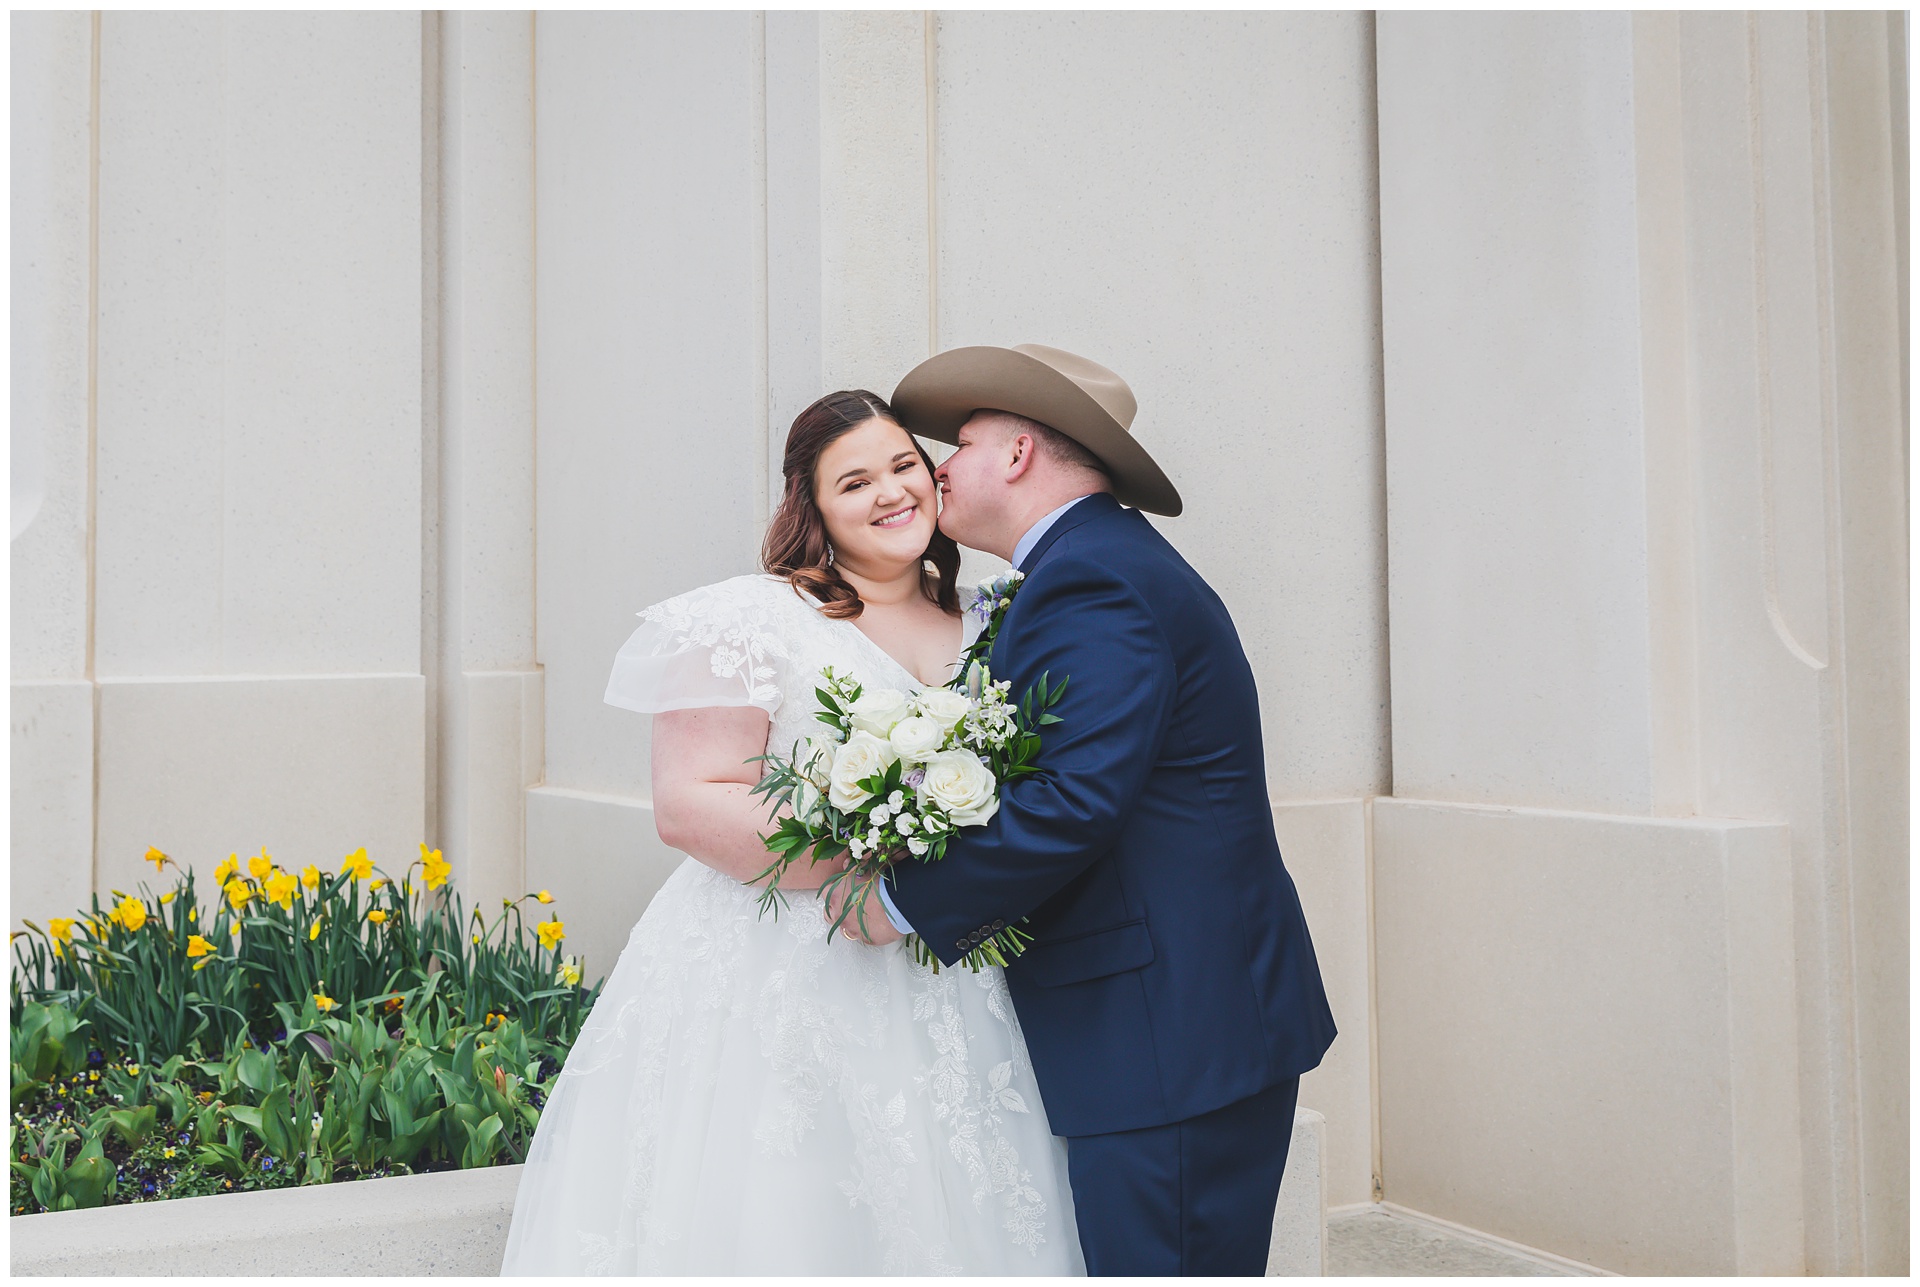 Wedding photography at the LDS Temple and Pinstripes by Kansas City wedding photographers Wisdom-Watson Weddings.